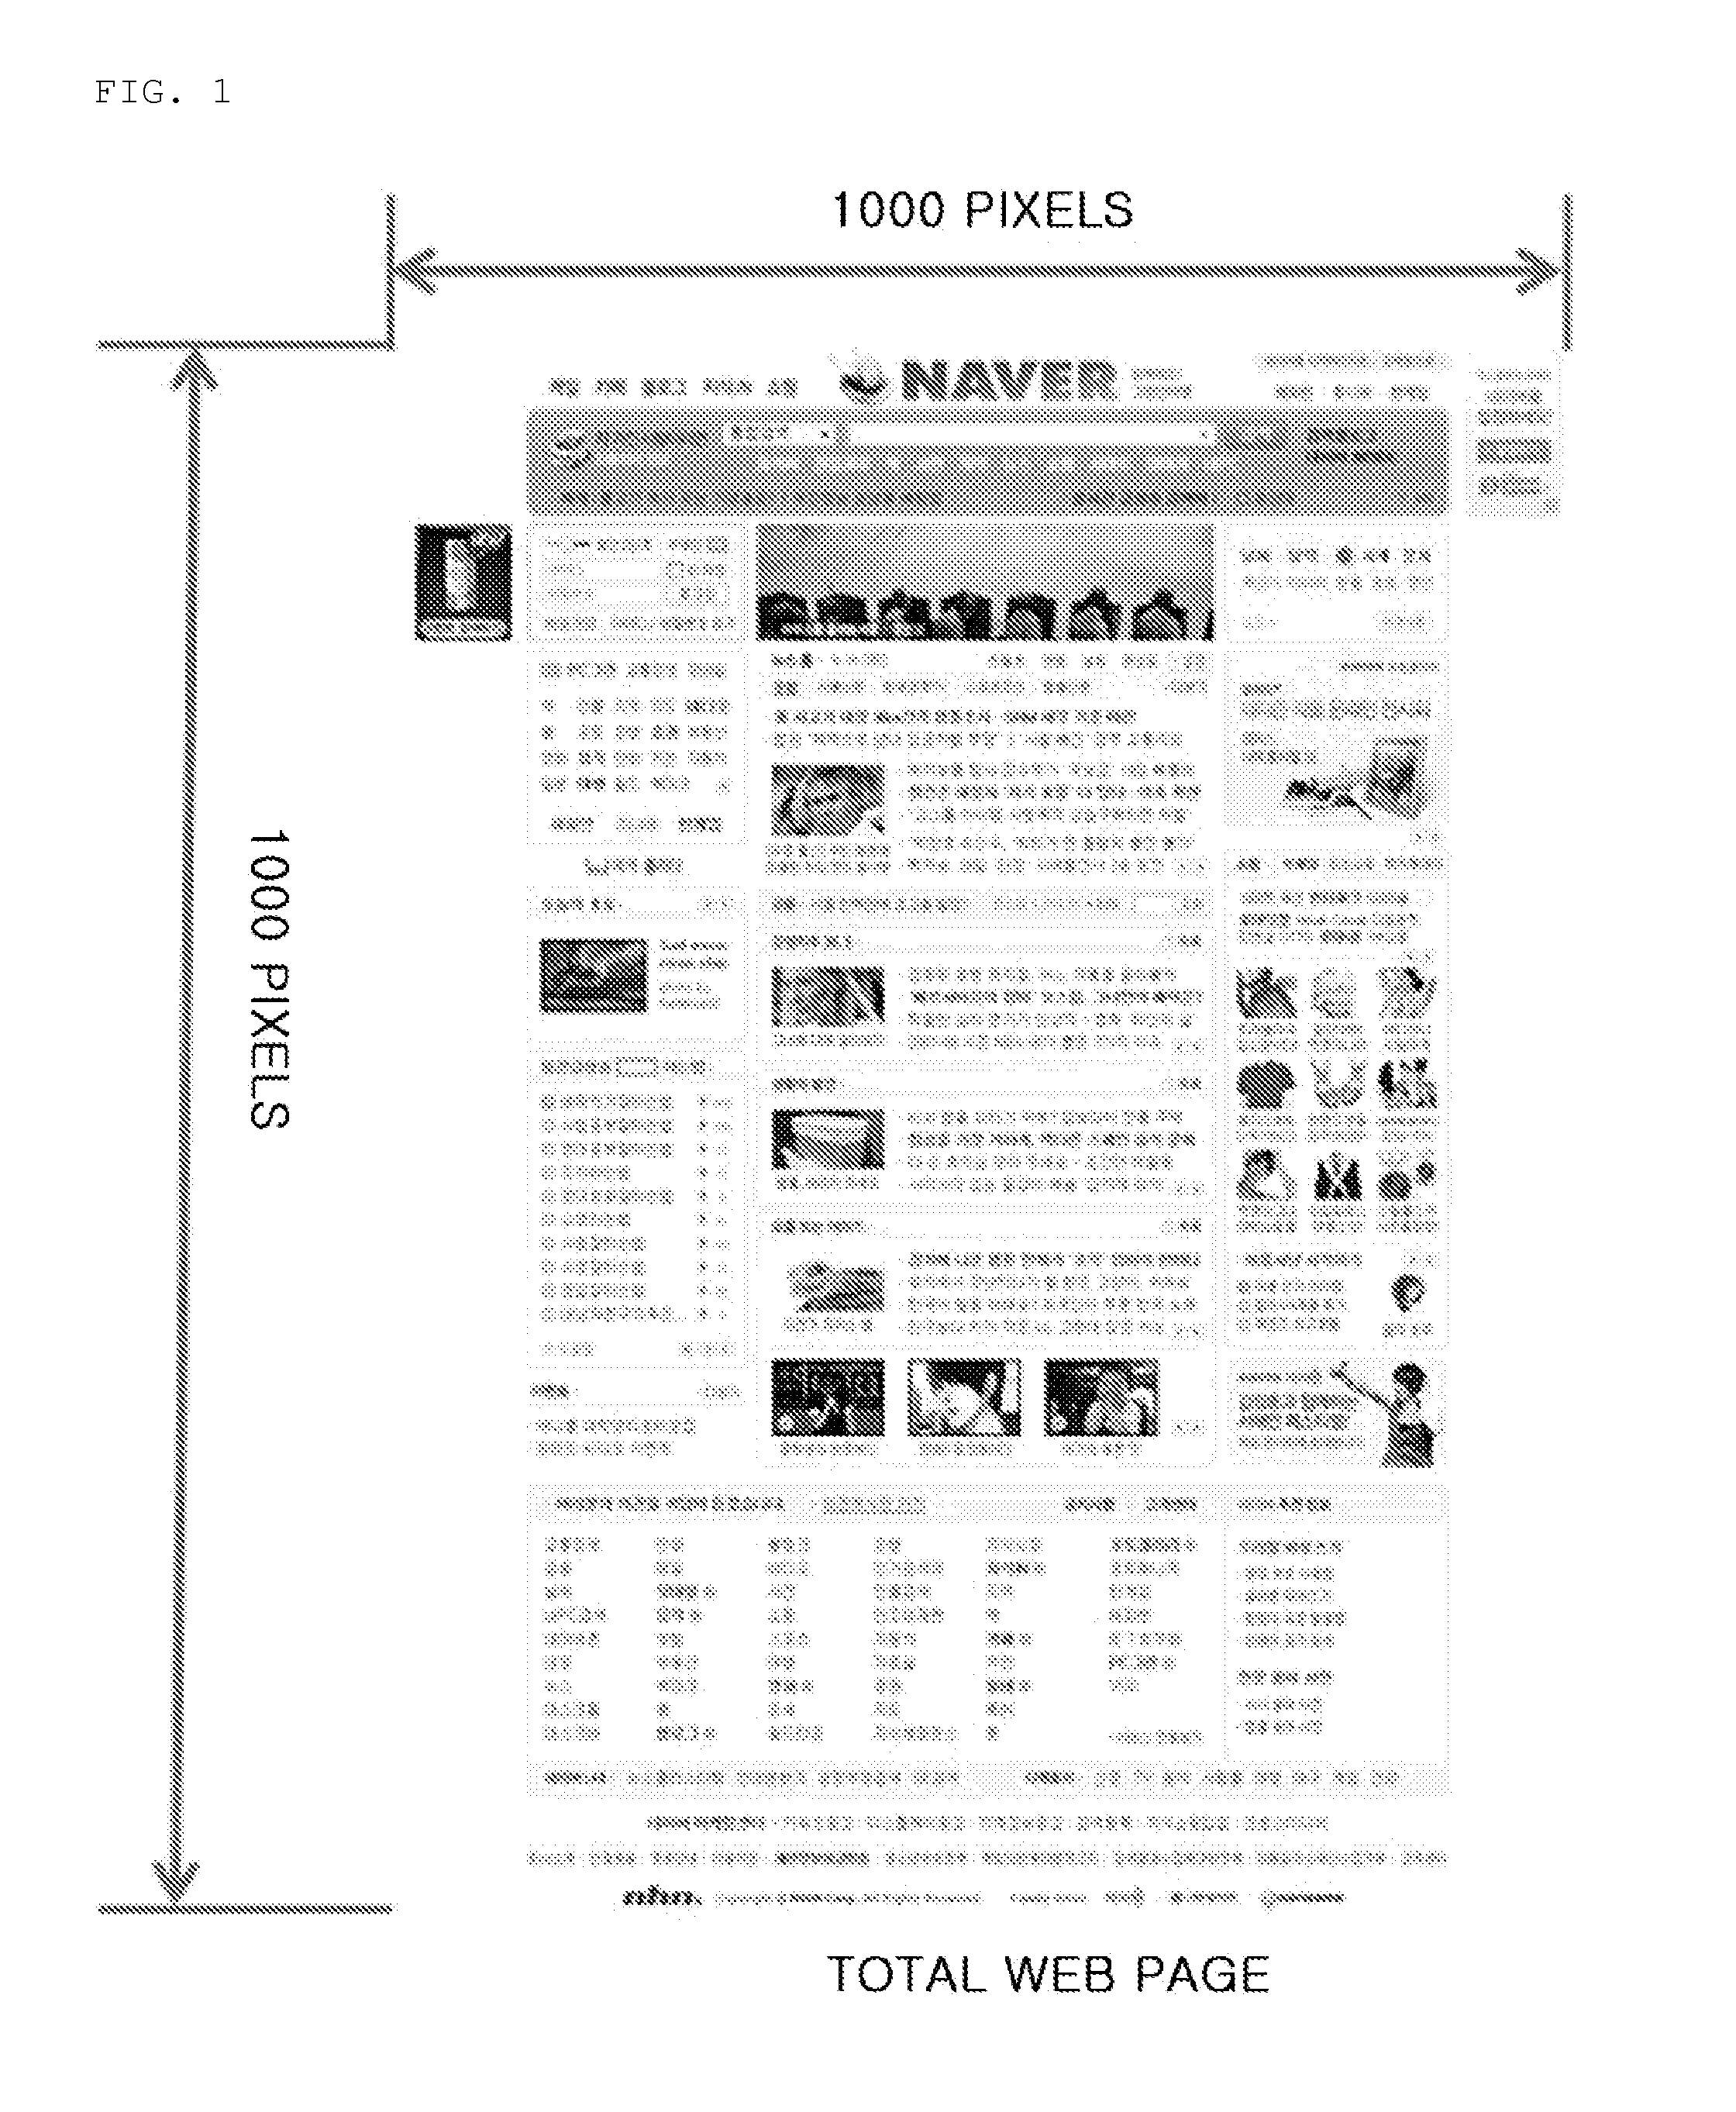 Method for printing a captured screen of web pages